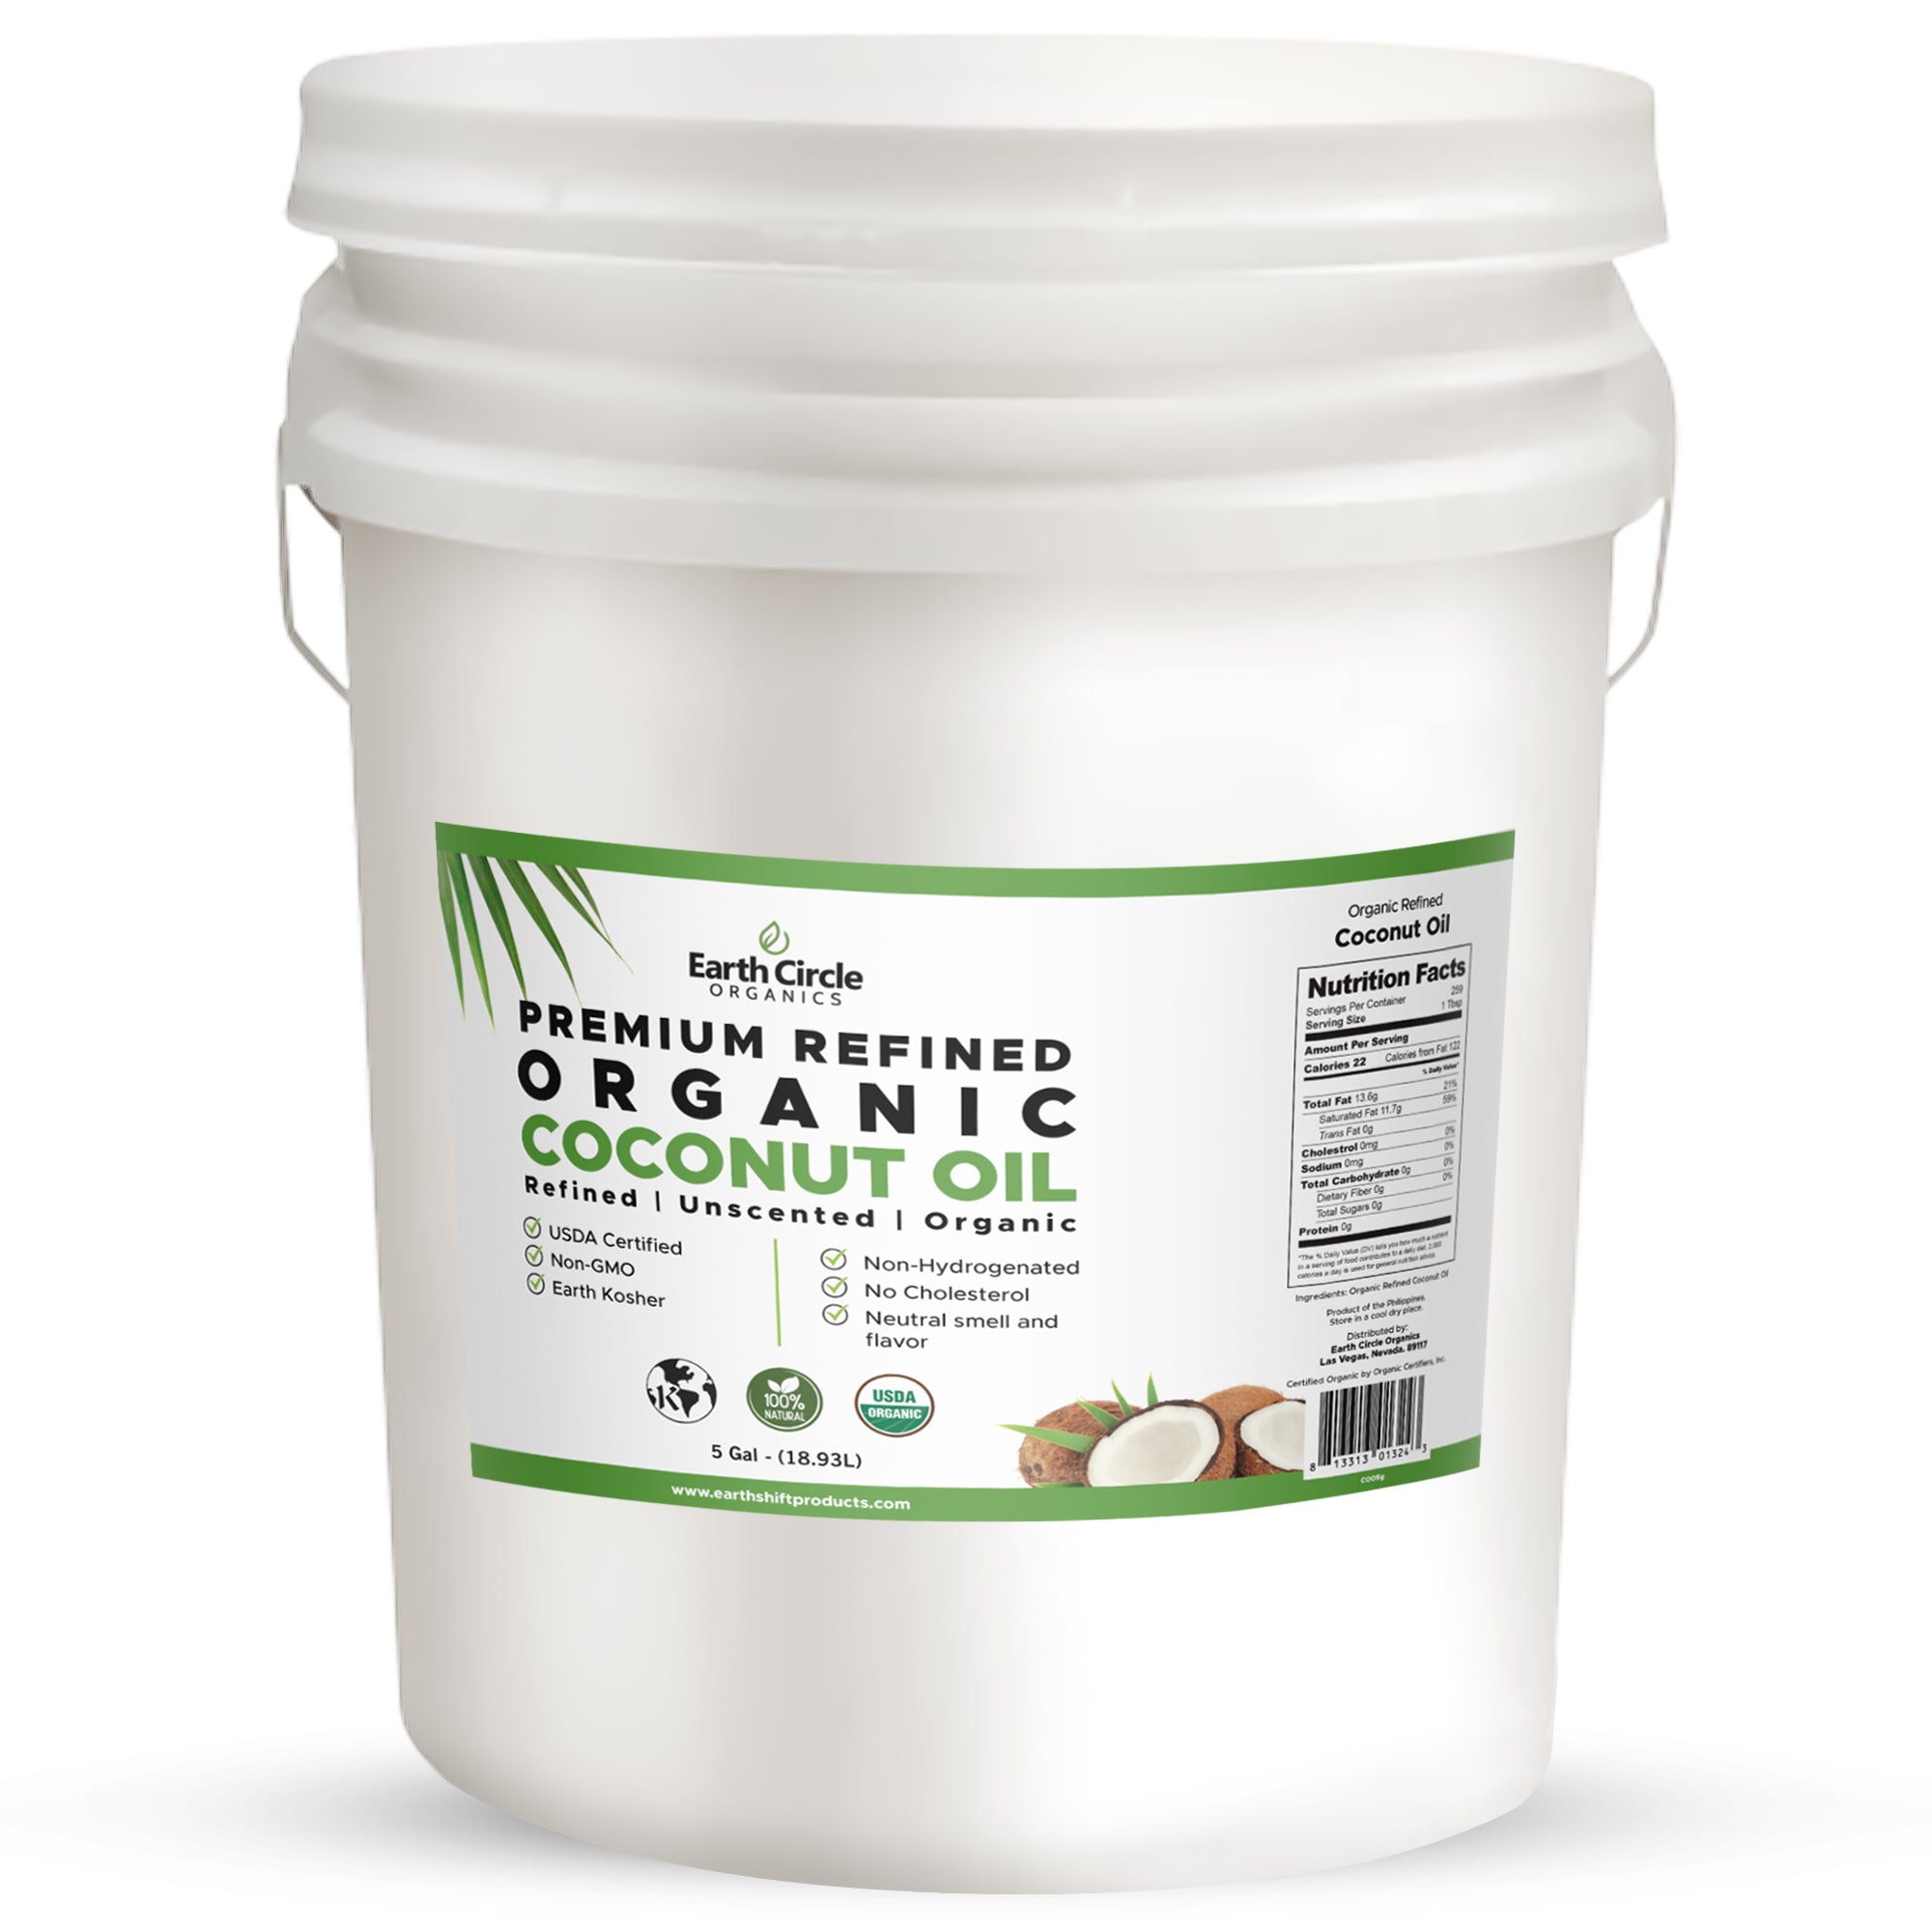 Organic Refined Coconut Oil - 5 Gallon Size | Great for Cooking and Skin Care | Lab Tested for Purity and Ethically Sourced